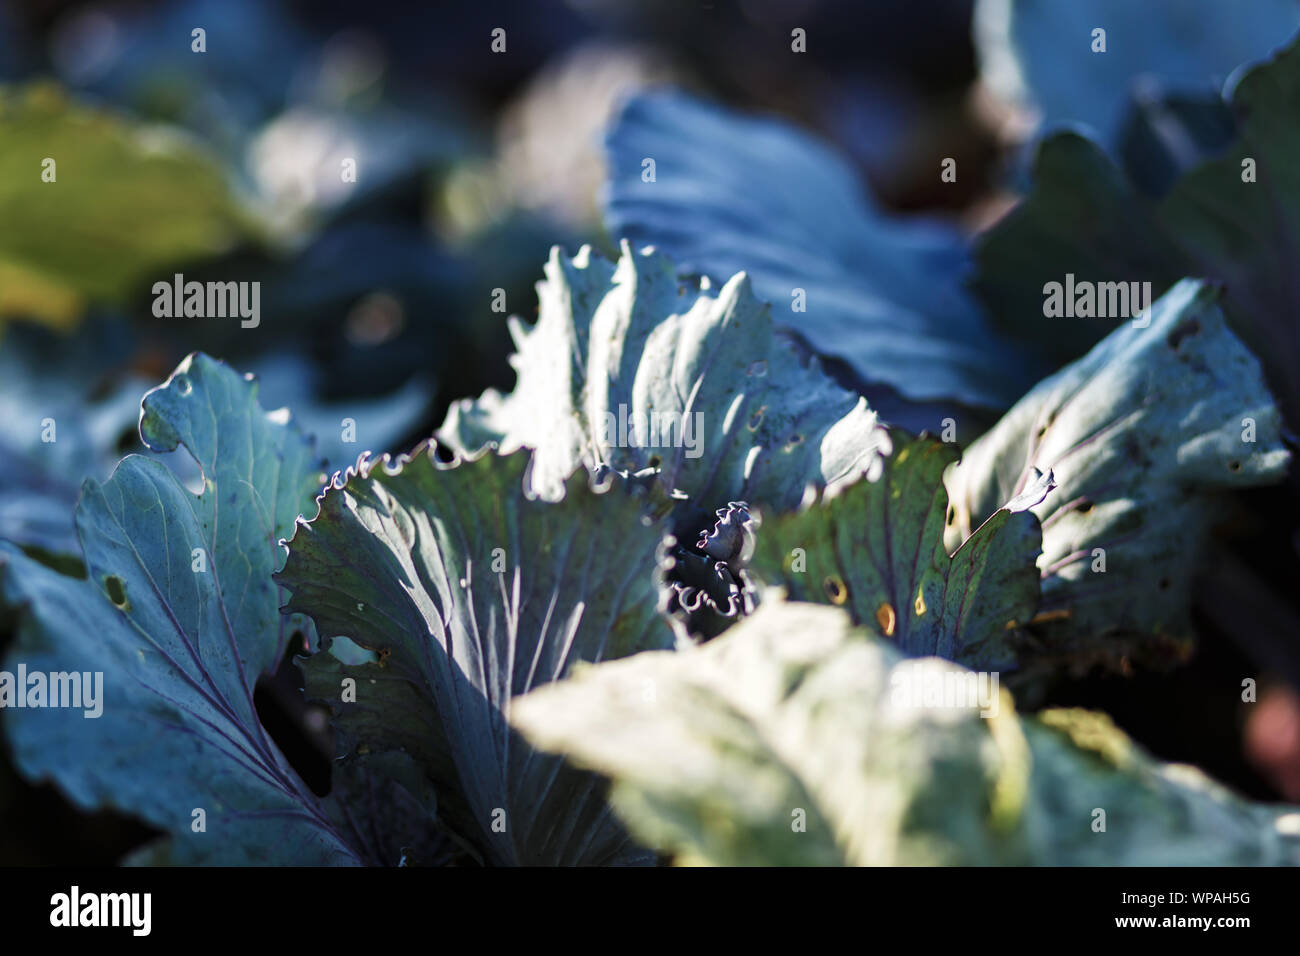 Ill bad cabbage that suffer from disease and insects Stock Photo